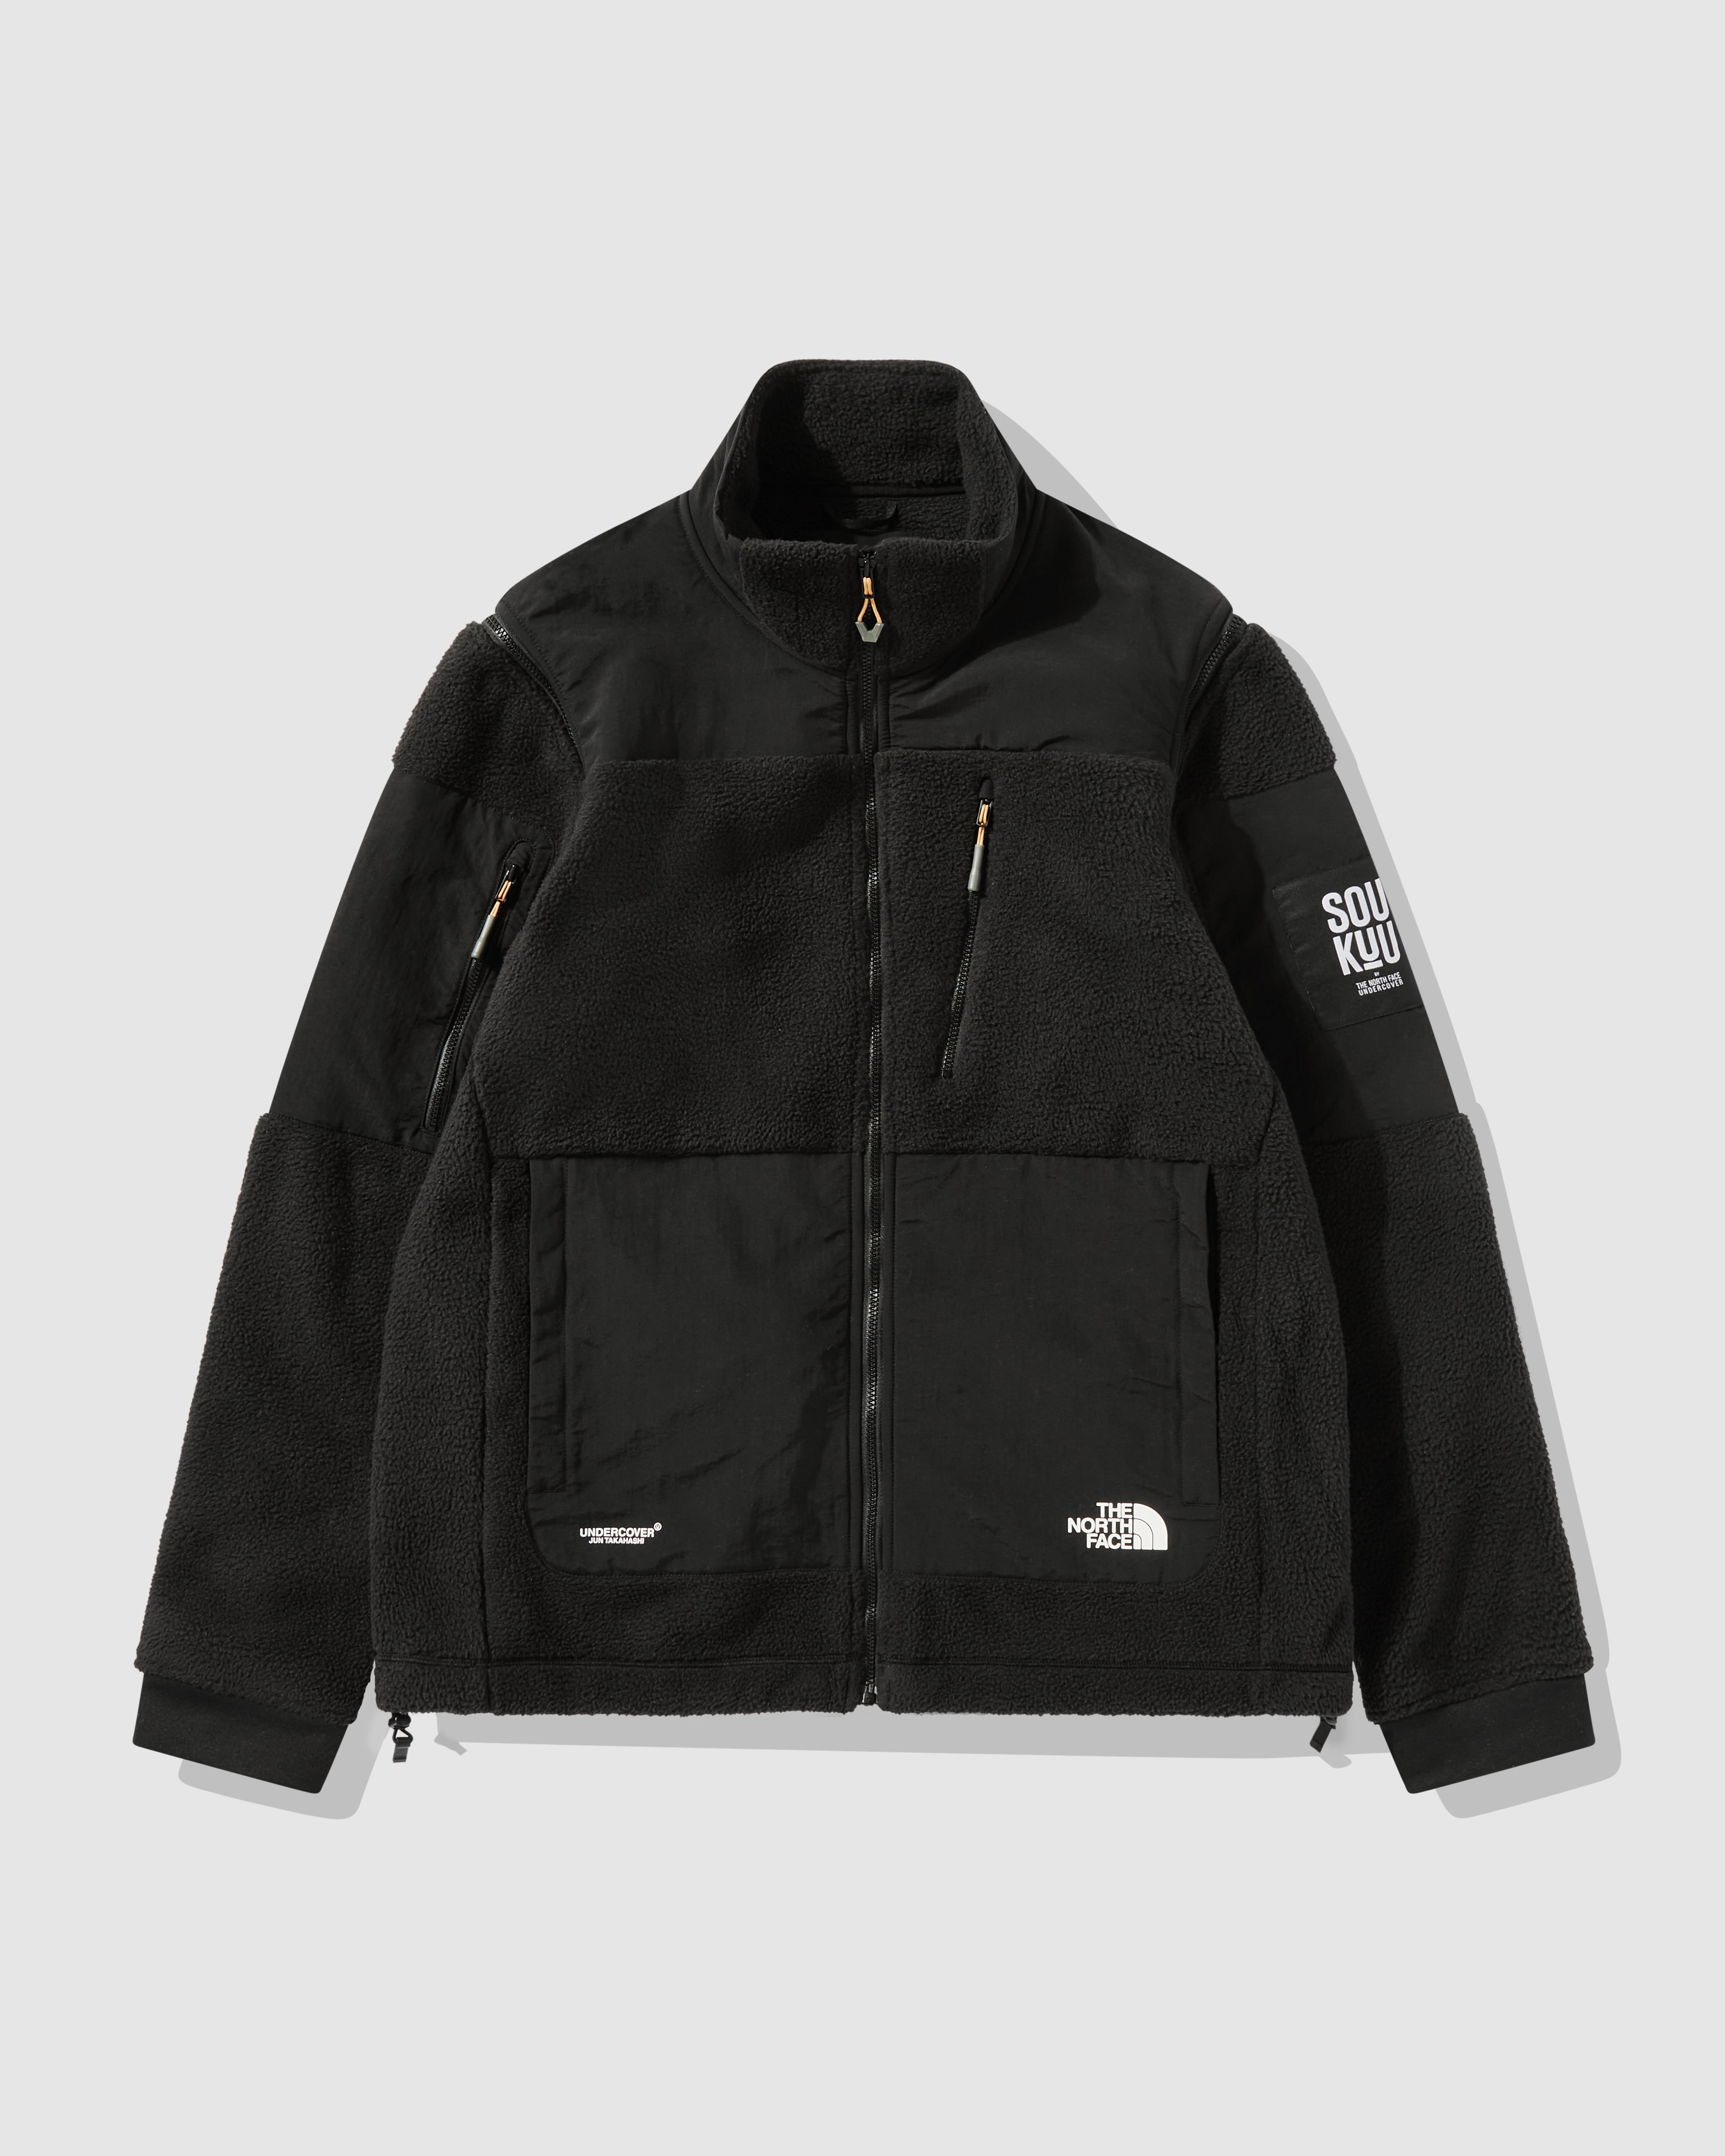 SOUKUU by The North Face X Undercover – DSM London